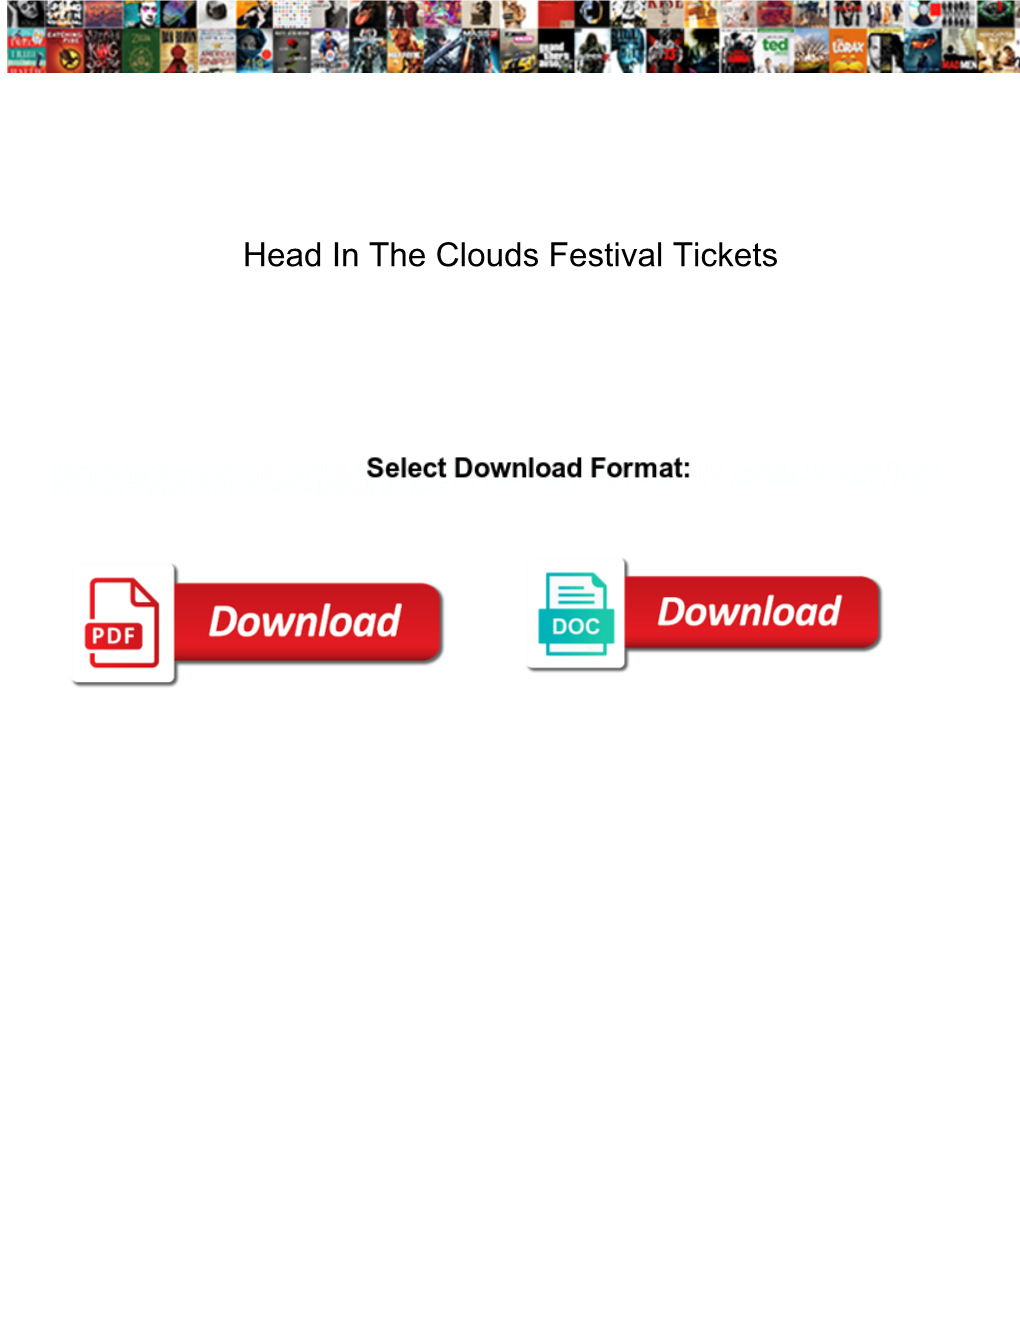 Head in the Clouds Festival Tickets